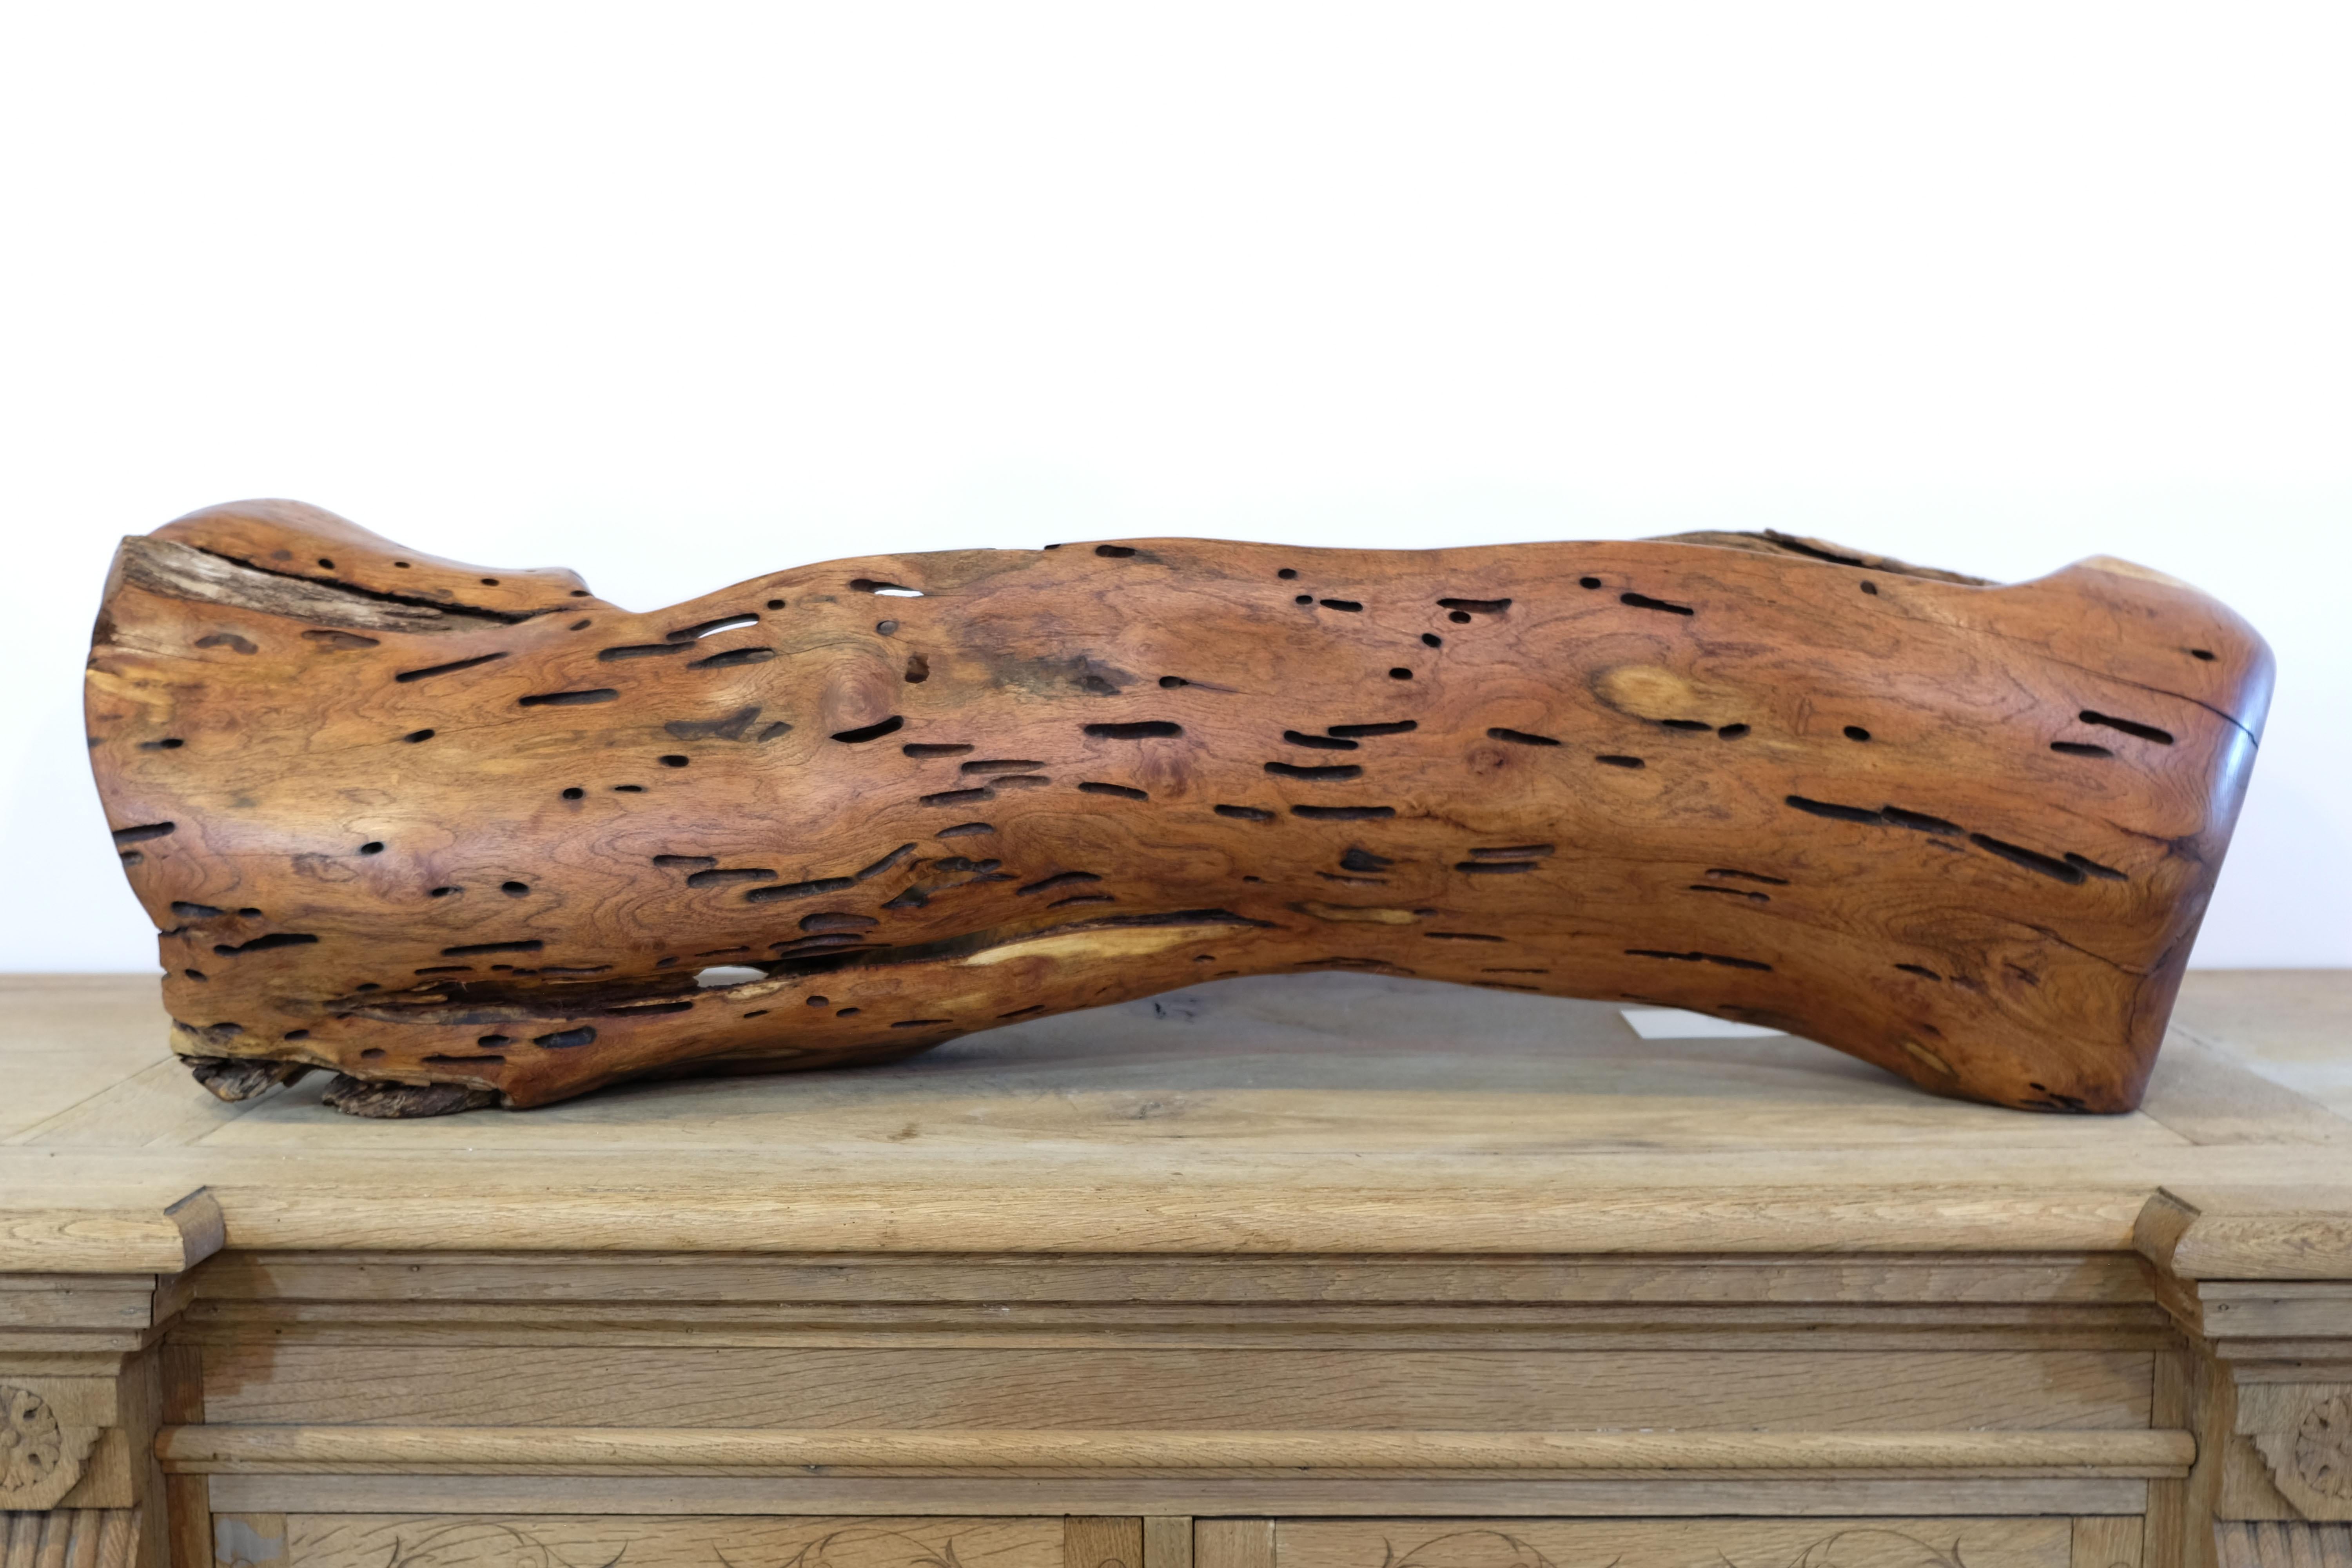 Texas mesquite hand carved sculpture created by woodworker tim tim.